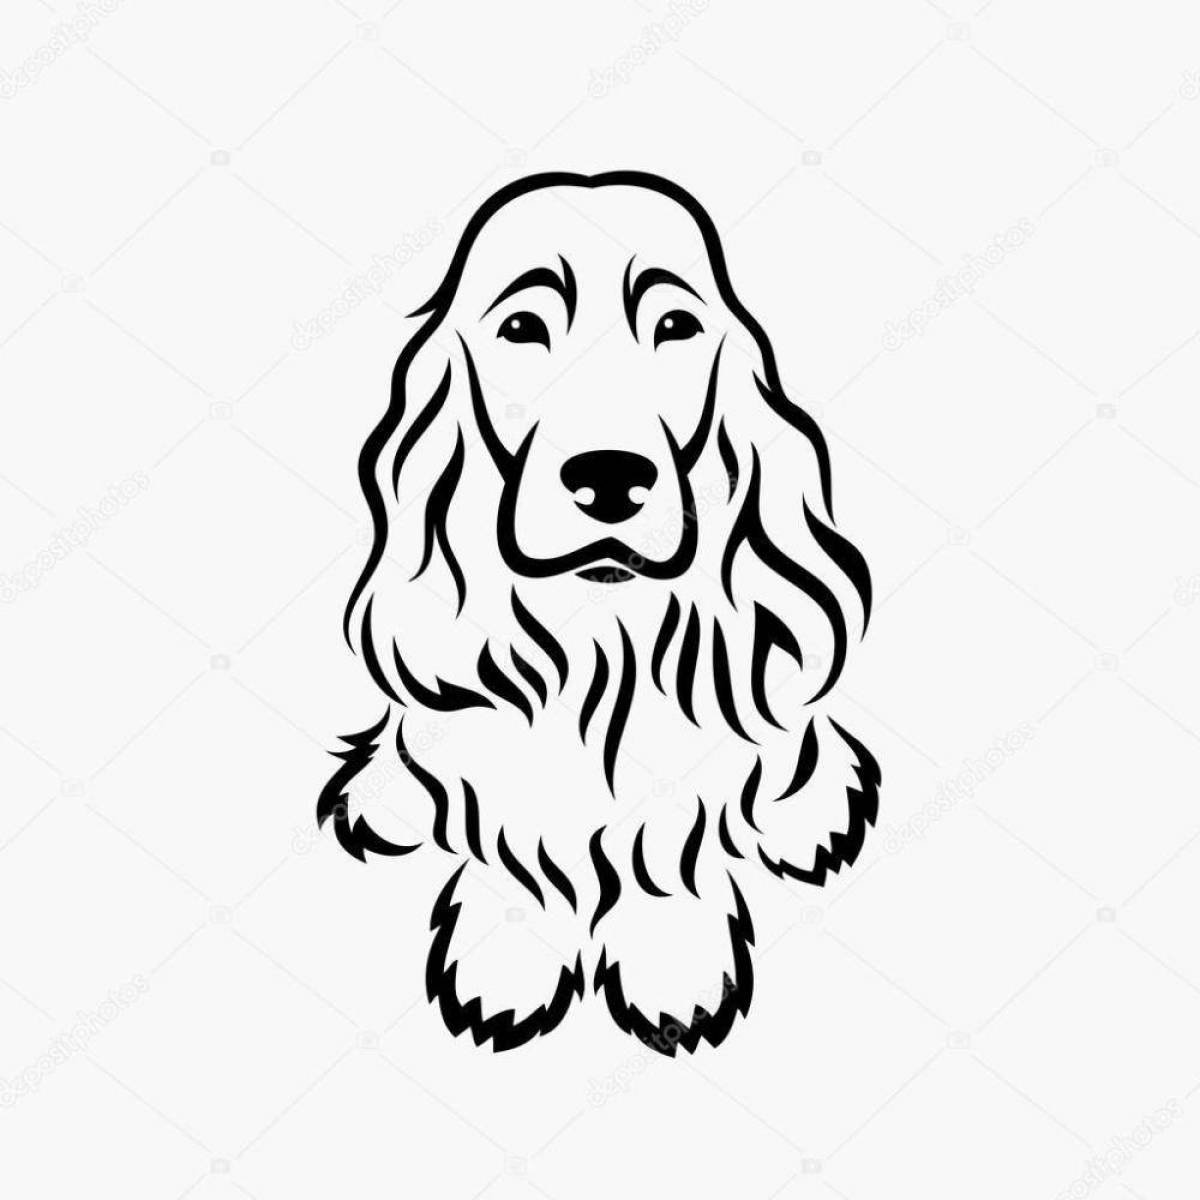 Coloring page of a wild english cocker spaniel